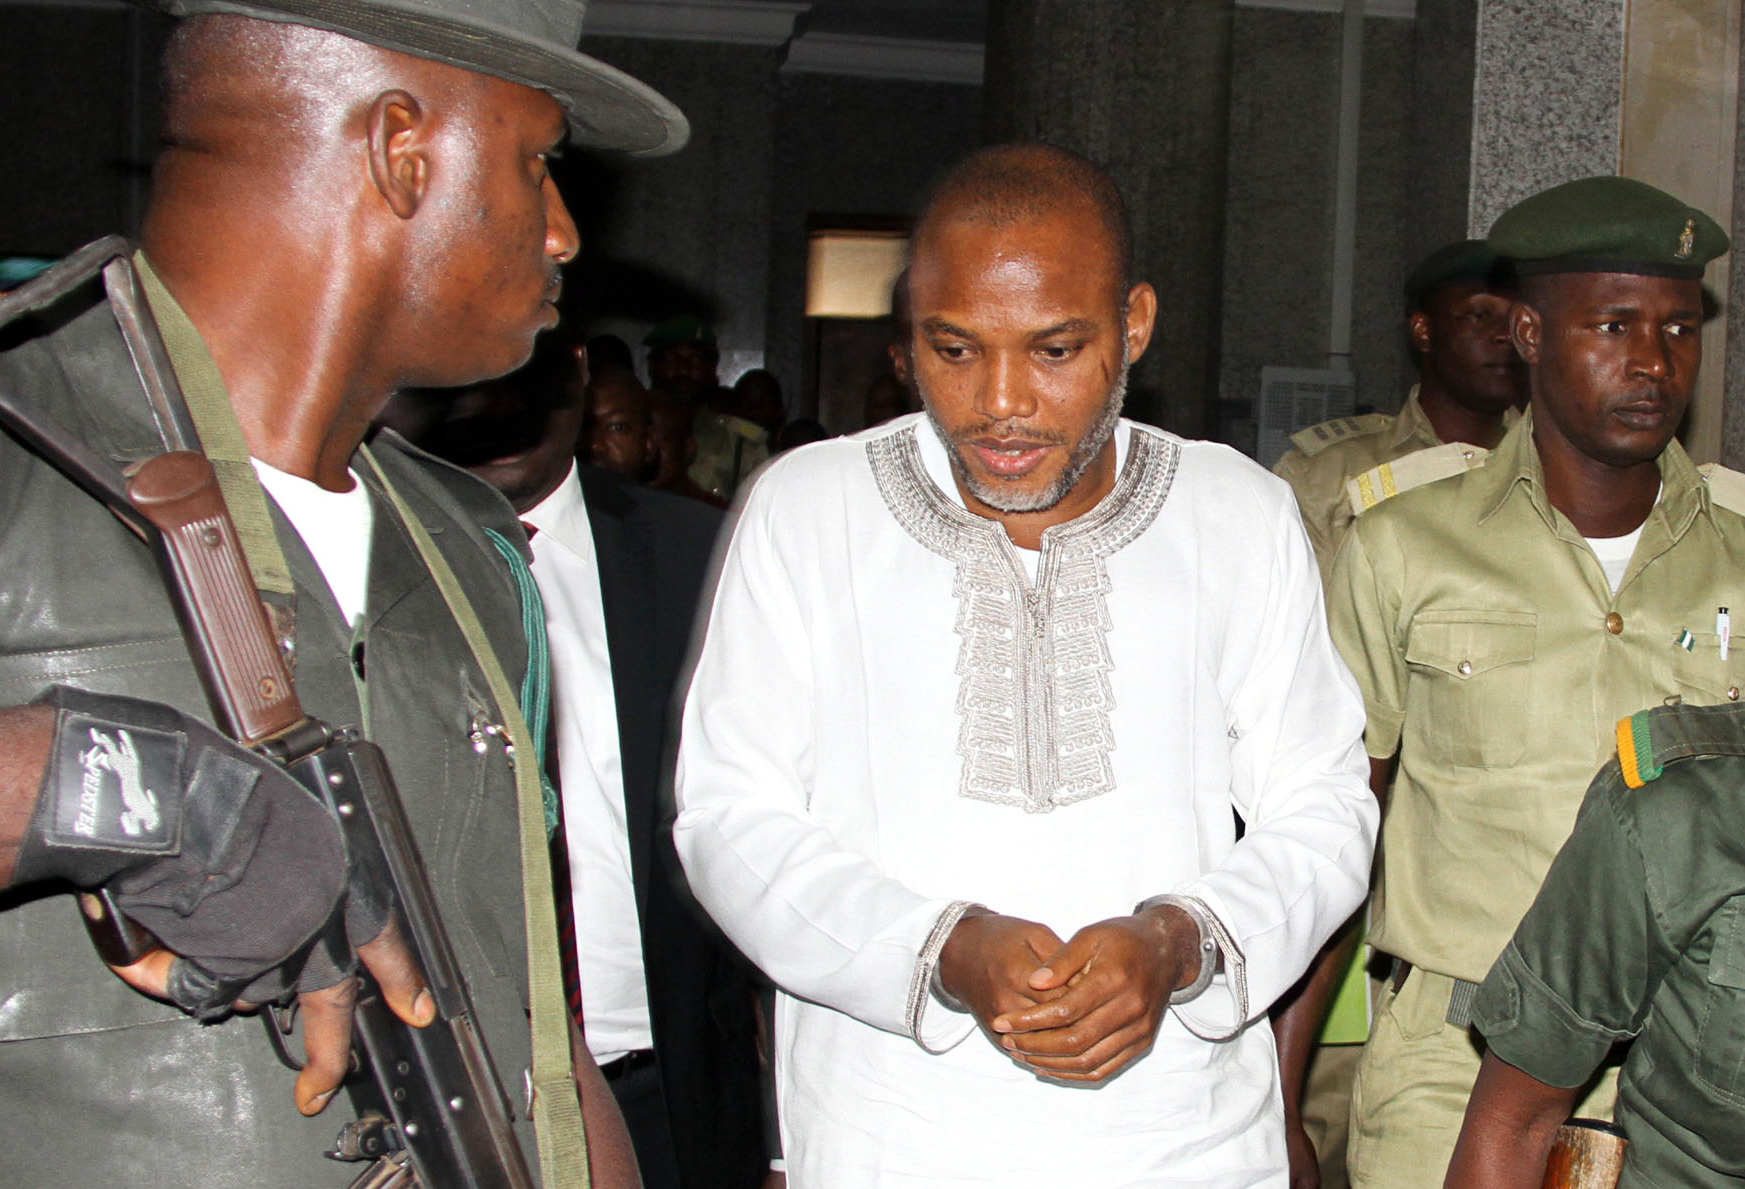 Leader of Indigenous Peoples of Biafra (IPOB), Nnamdi Kanu (C) attends a trial for treasonable felony at the Federal High court in Abuja, on February 9, 2016. Nnamdi Kanu, is accused by the state of "propagating a secessionist agenda" with the intention to "levy war against Nigeria". Kanu, who also runs the London-based Radio Biafra, is facing charges of treasonable felony, managing an unlawful society and illegally shipping radio equipment into the country. He has been in custody since his arrest in October 2015, despite being granted bail, and denied all charges.  / AFP / Pius Utomi EKPEI        (Photo credit should read PIUS UTOMI EKPEI/AFP/Getty Images)